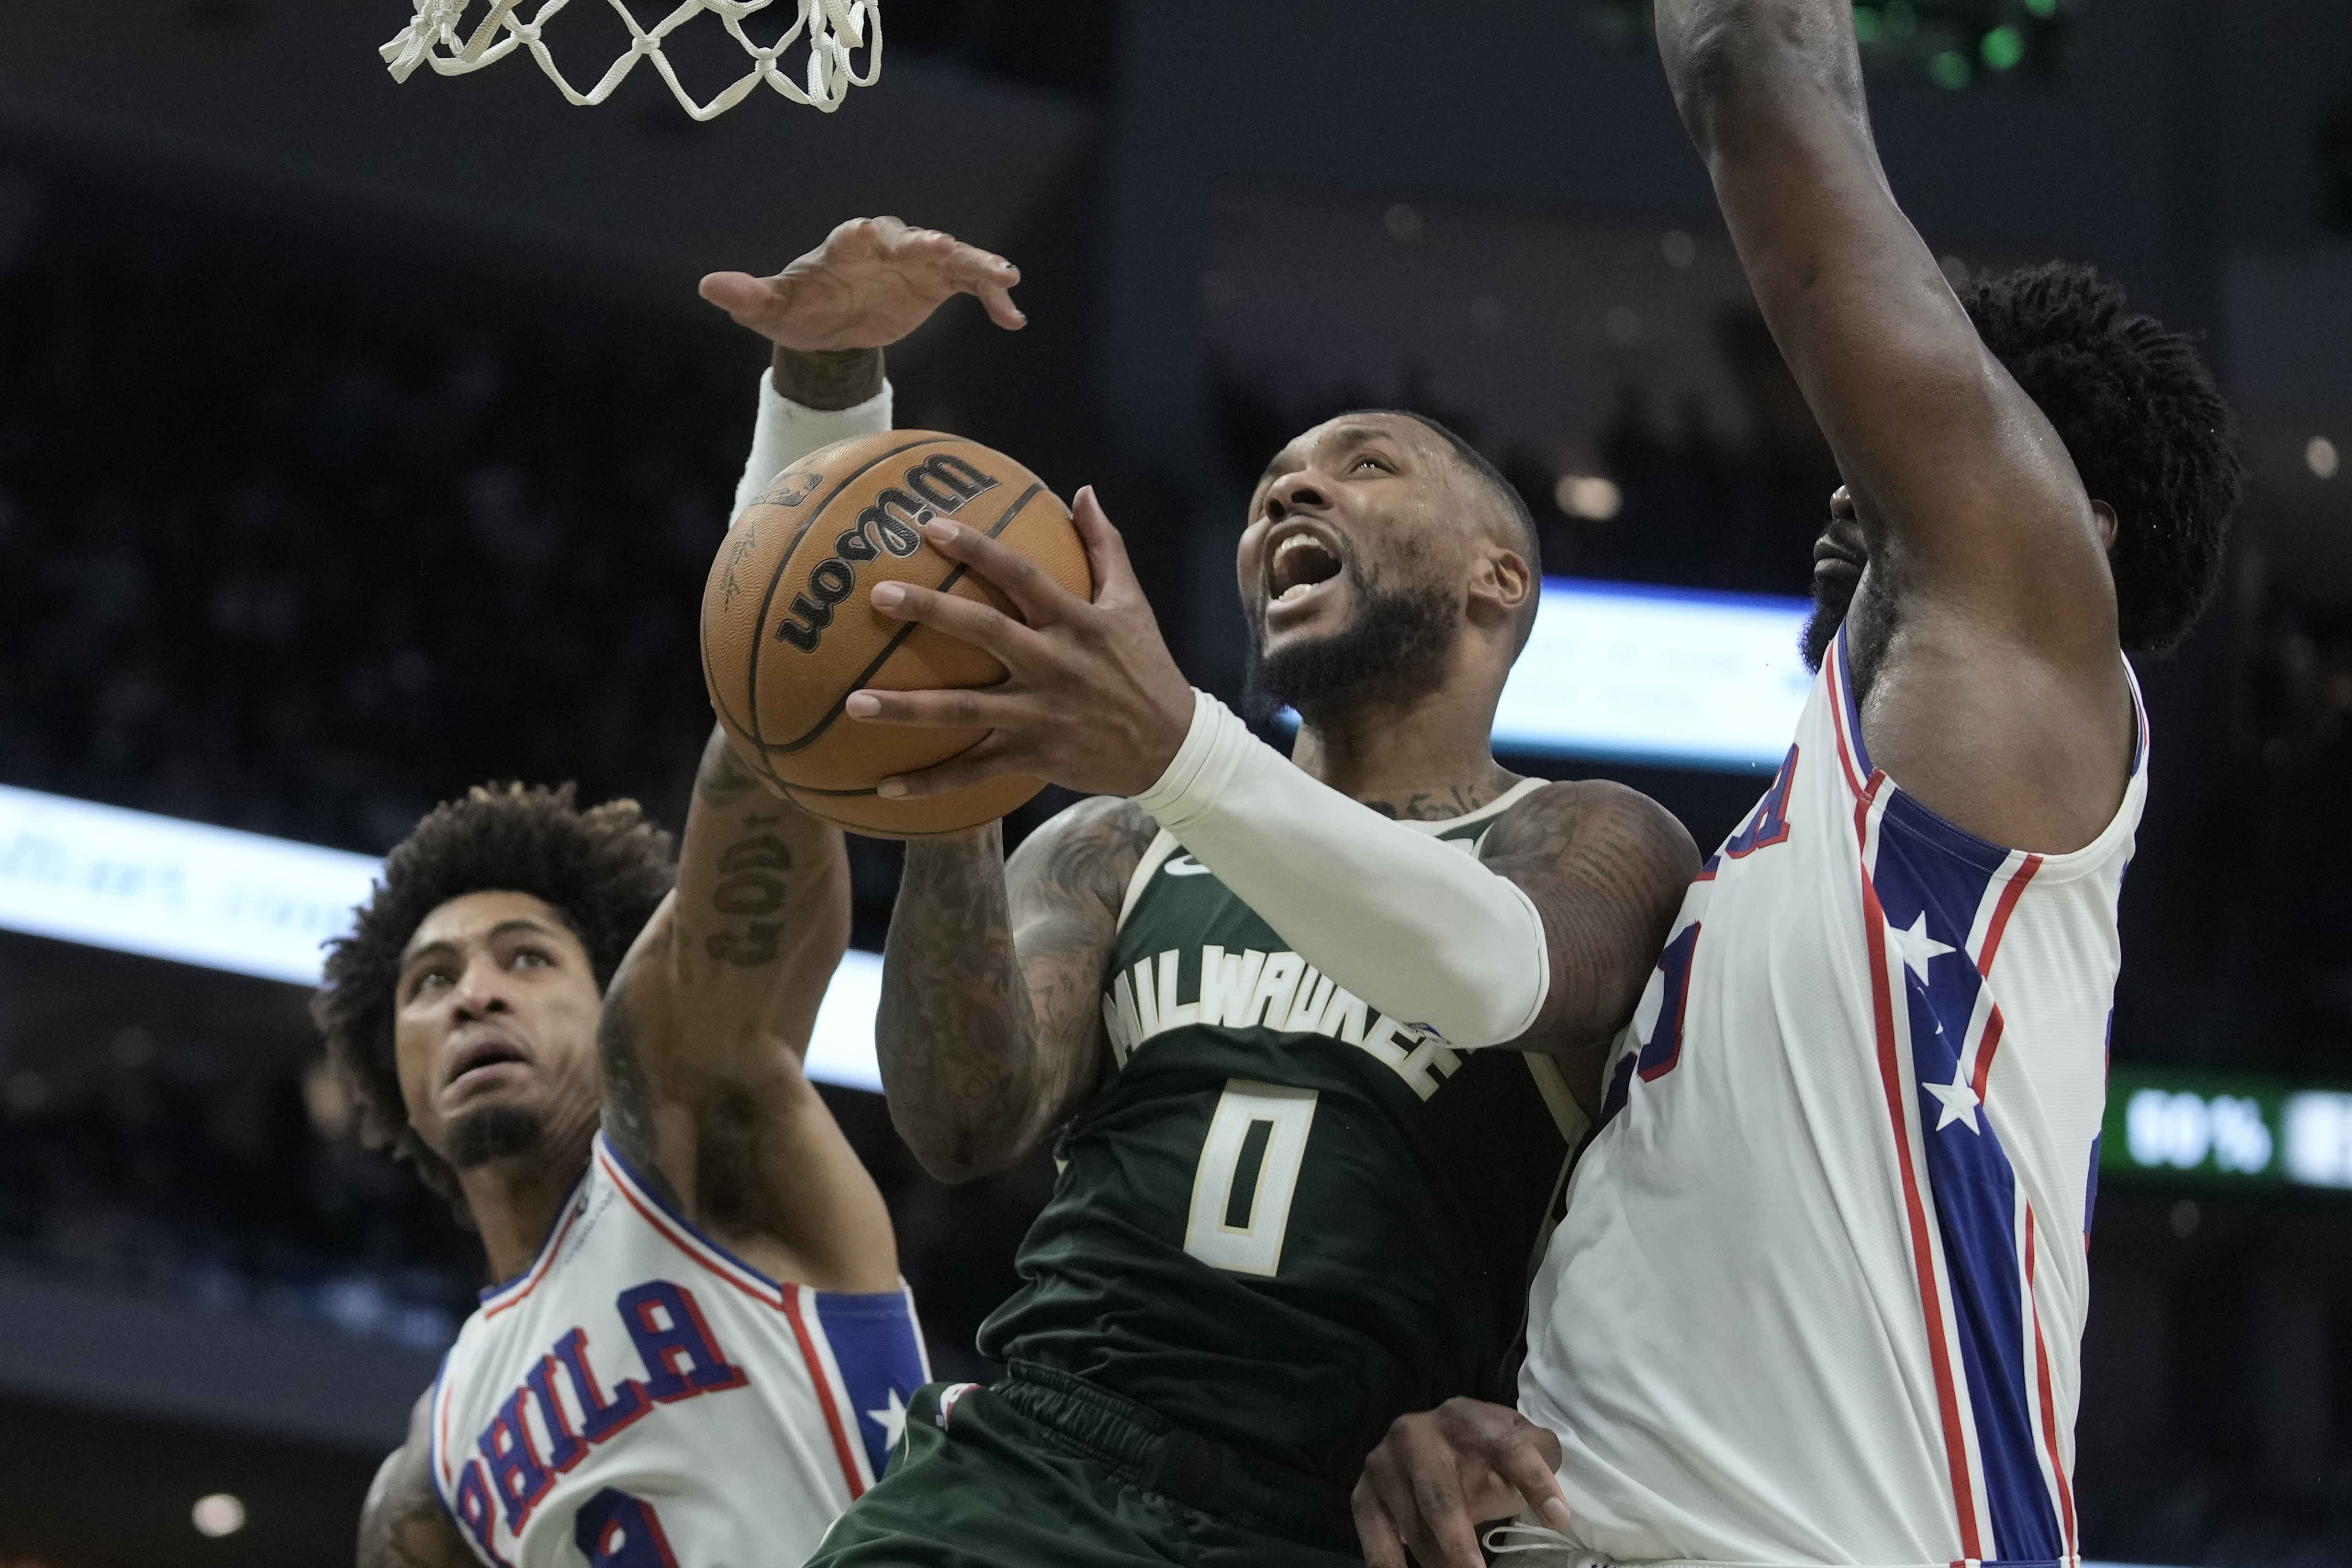 Giannis and Lillard combine for 78; Rivers wins first game with Bucks